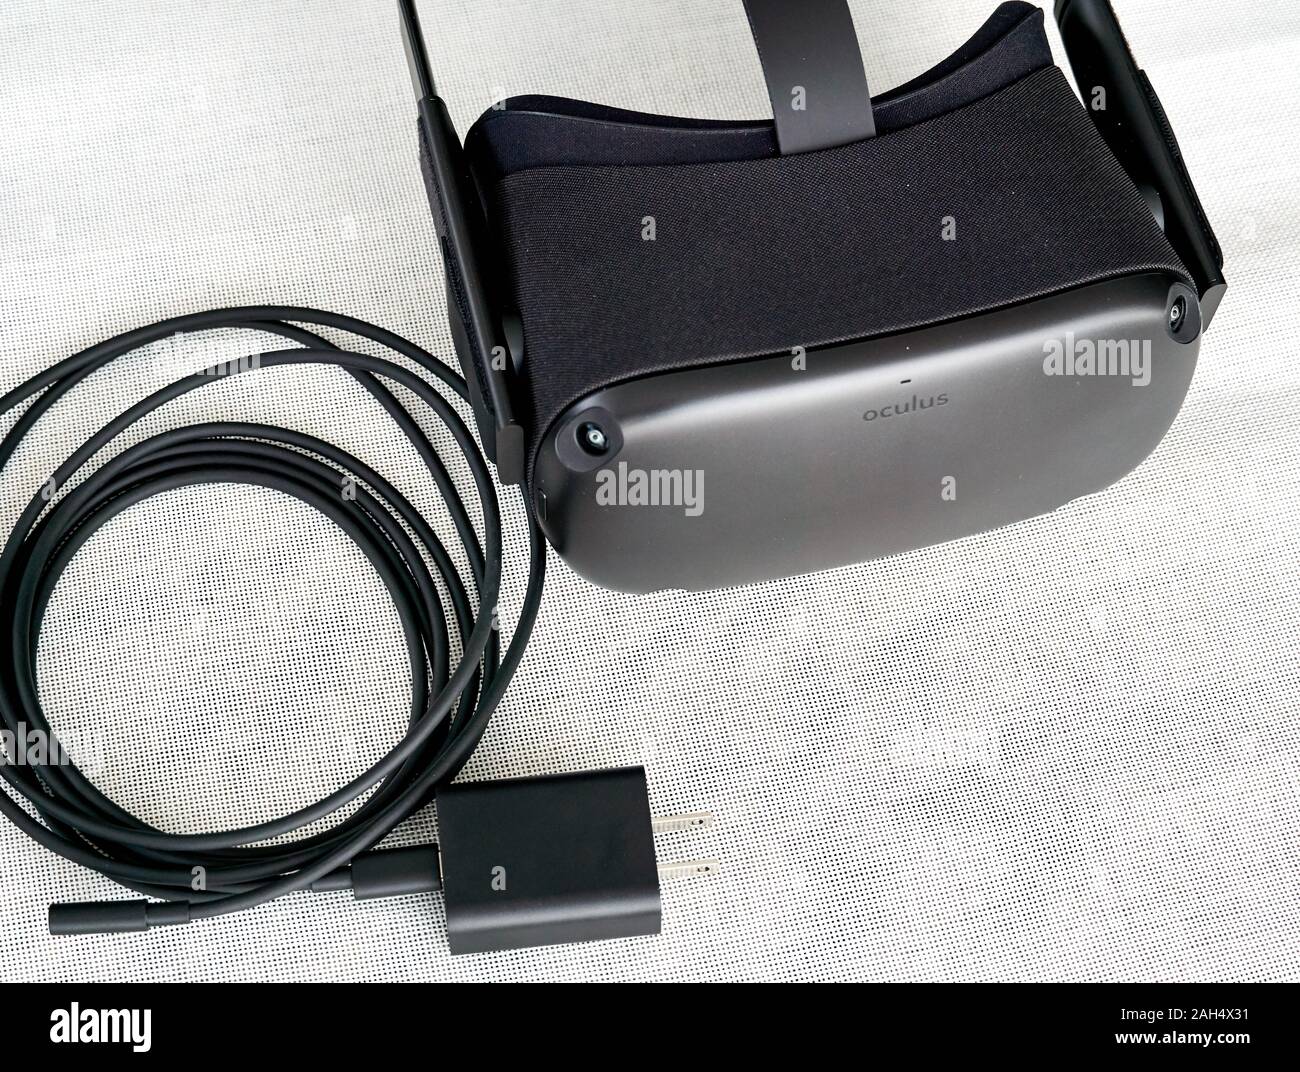 Montreal, Canada - December 23, 2019: Oculus Quest VR headset and charger.  The Oculus Quest is a first all in virtual reality wireless headset and sys  Stock Photo - Alamy